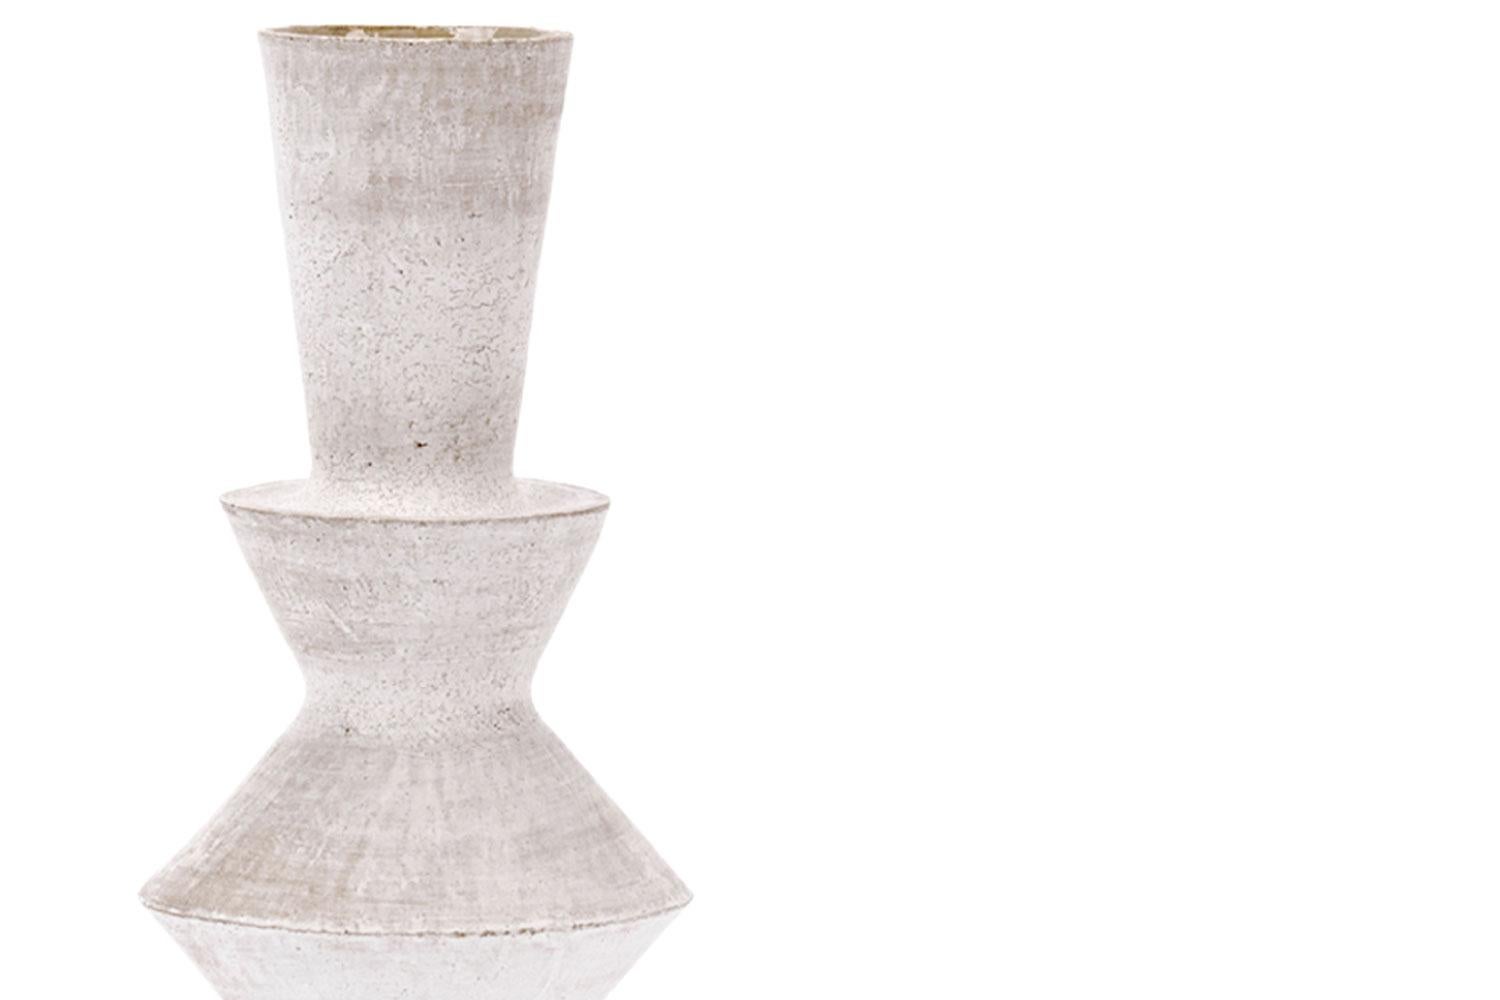 TRK vase, humble matter
TRK vase is part of the handmade vase collection by artist John Born in Brooklyn, NY in a white stoneware finish. Each signature piece is designed to complement the others as a group or stand alone to enhance the decor of